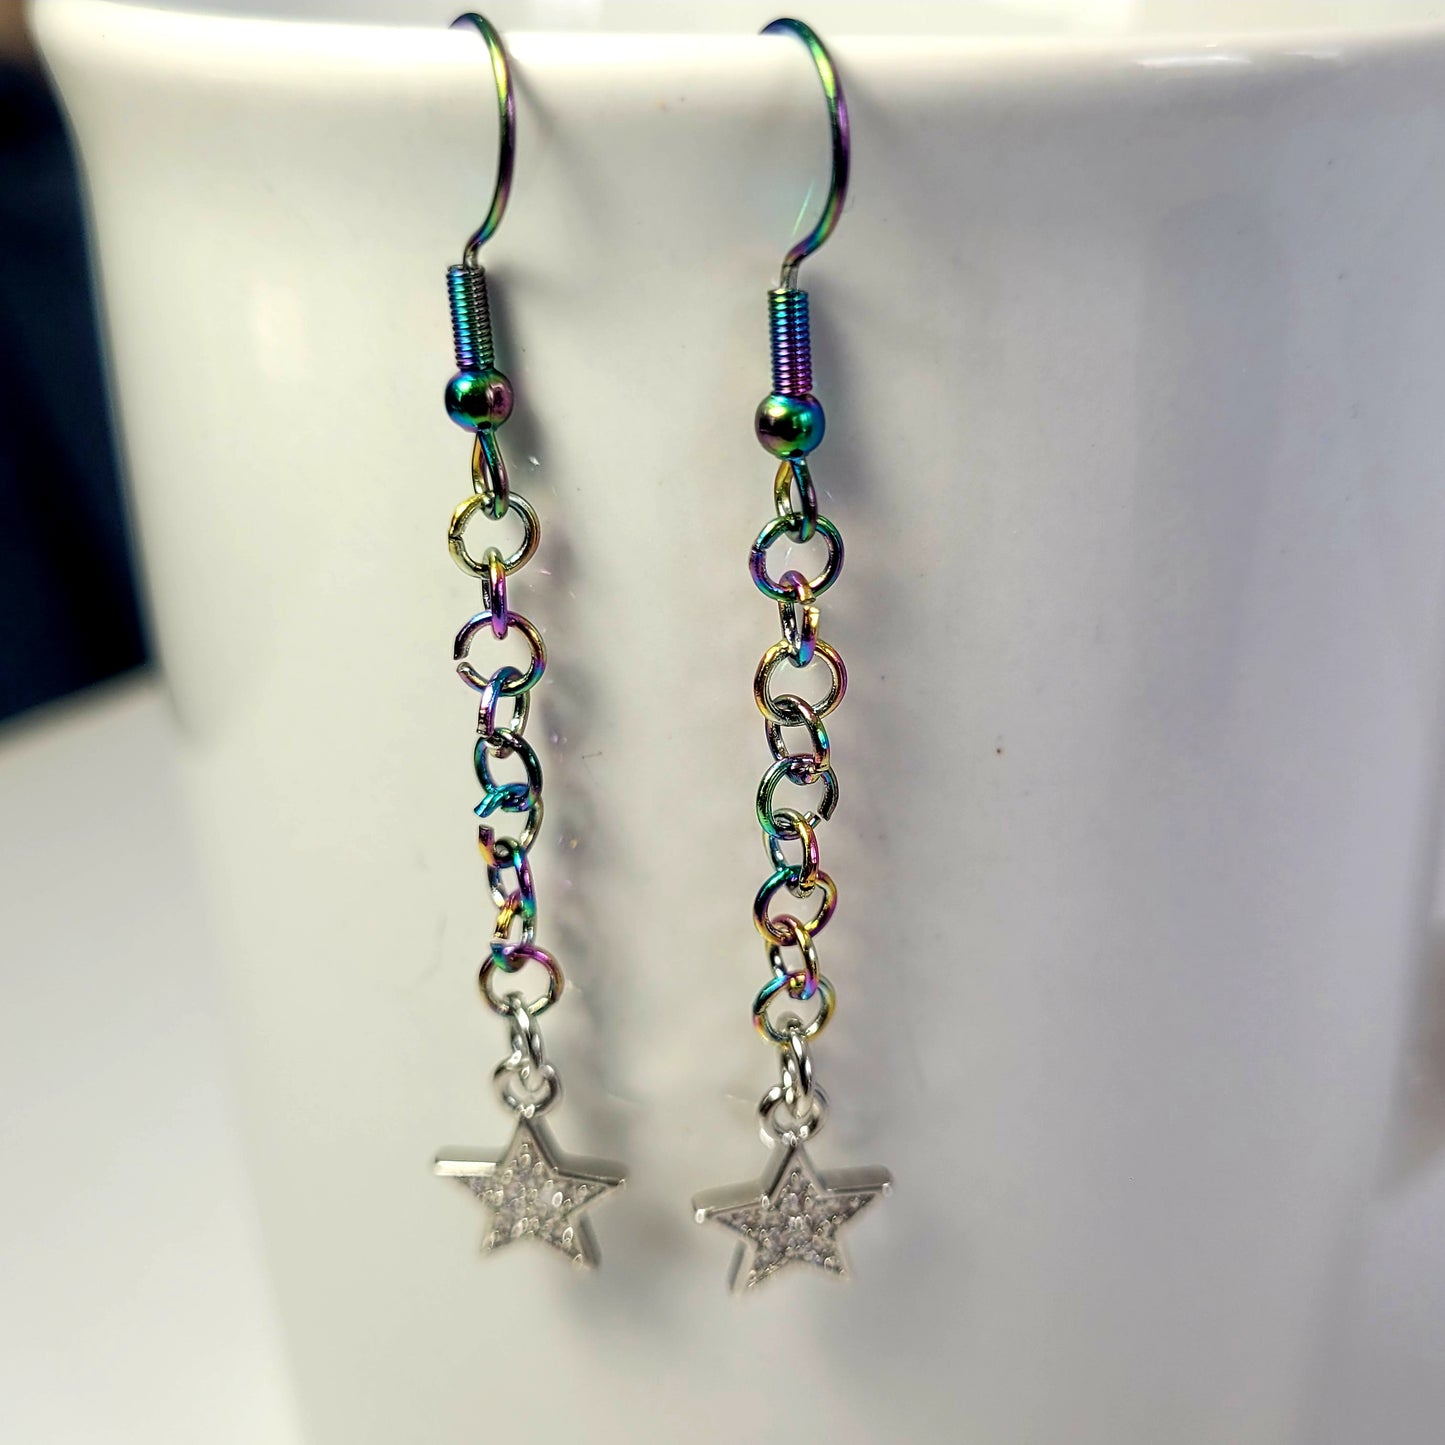 Earrings, multichrome rainbow chainmaille with dangle star